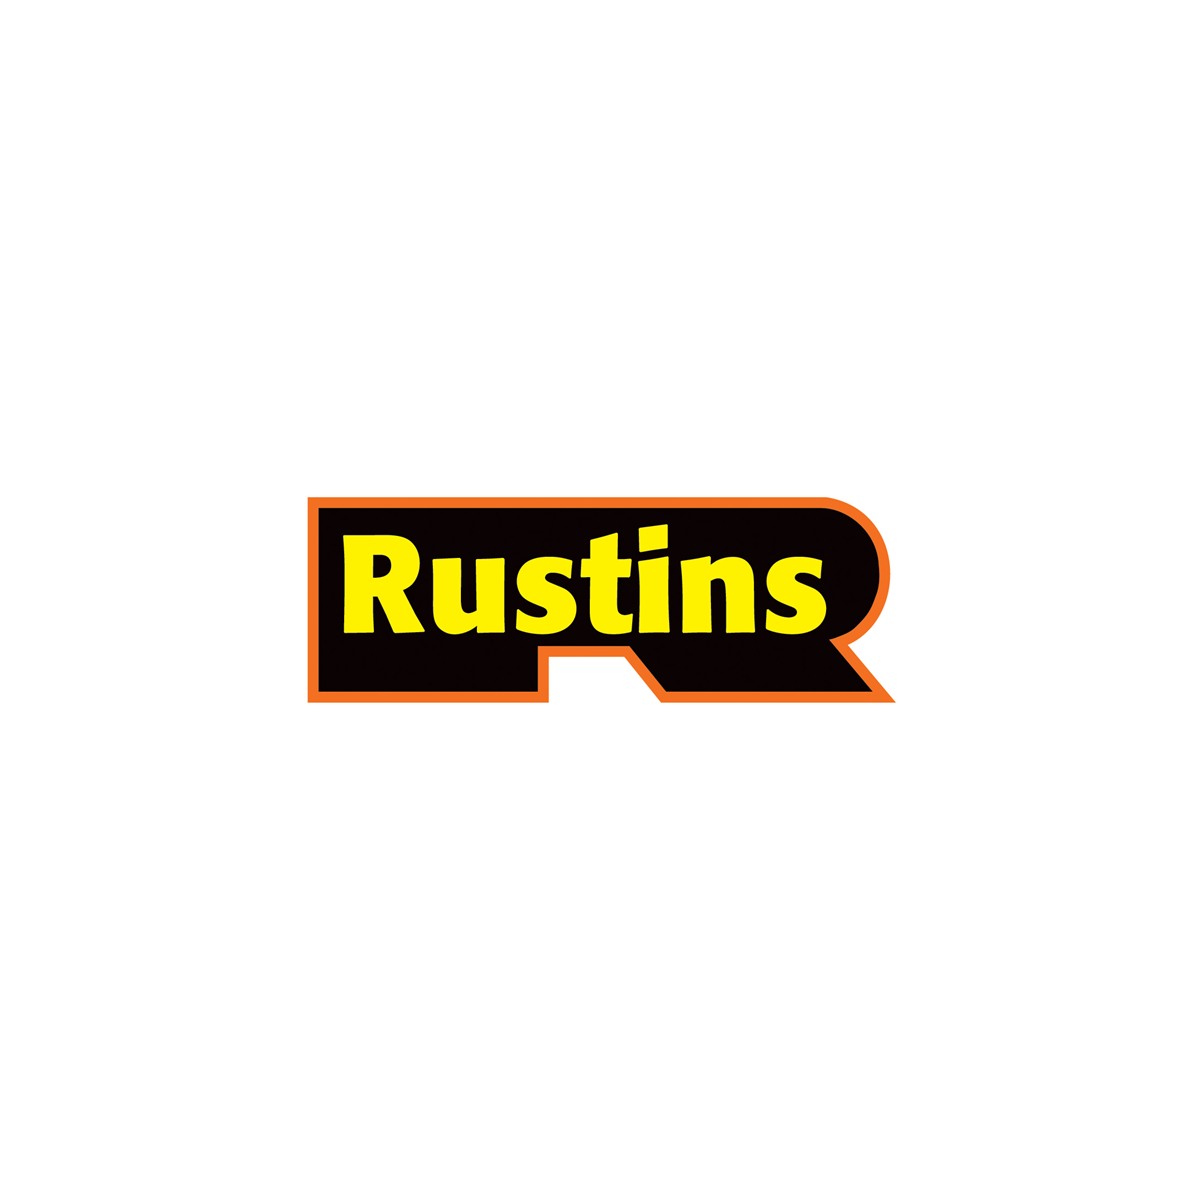 Where to buy Rustins Wood Treatments